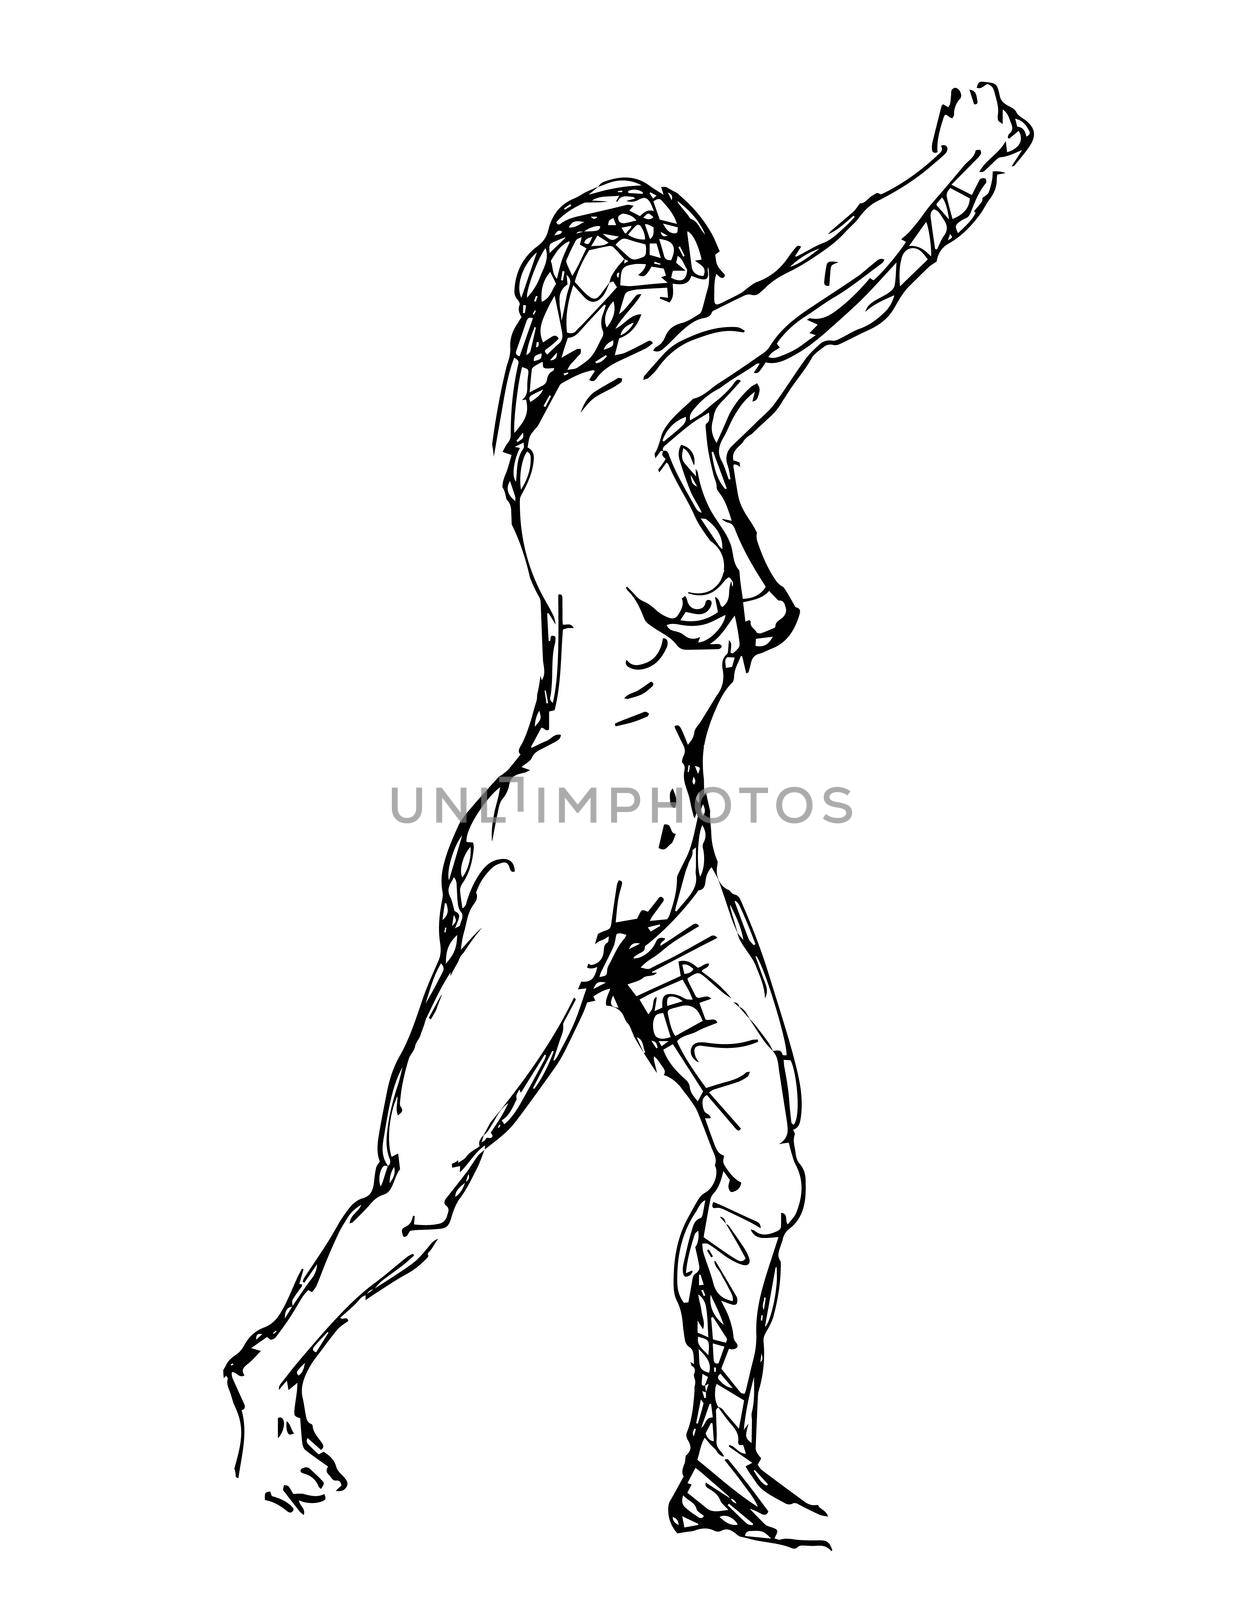 Doodle art illustration of a nude female human figure posing striding with hands clasp pointing up done in continuous line drawing style in black and white on isolated background.